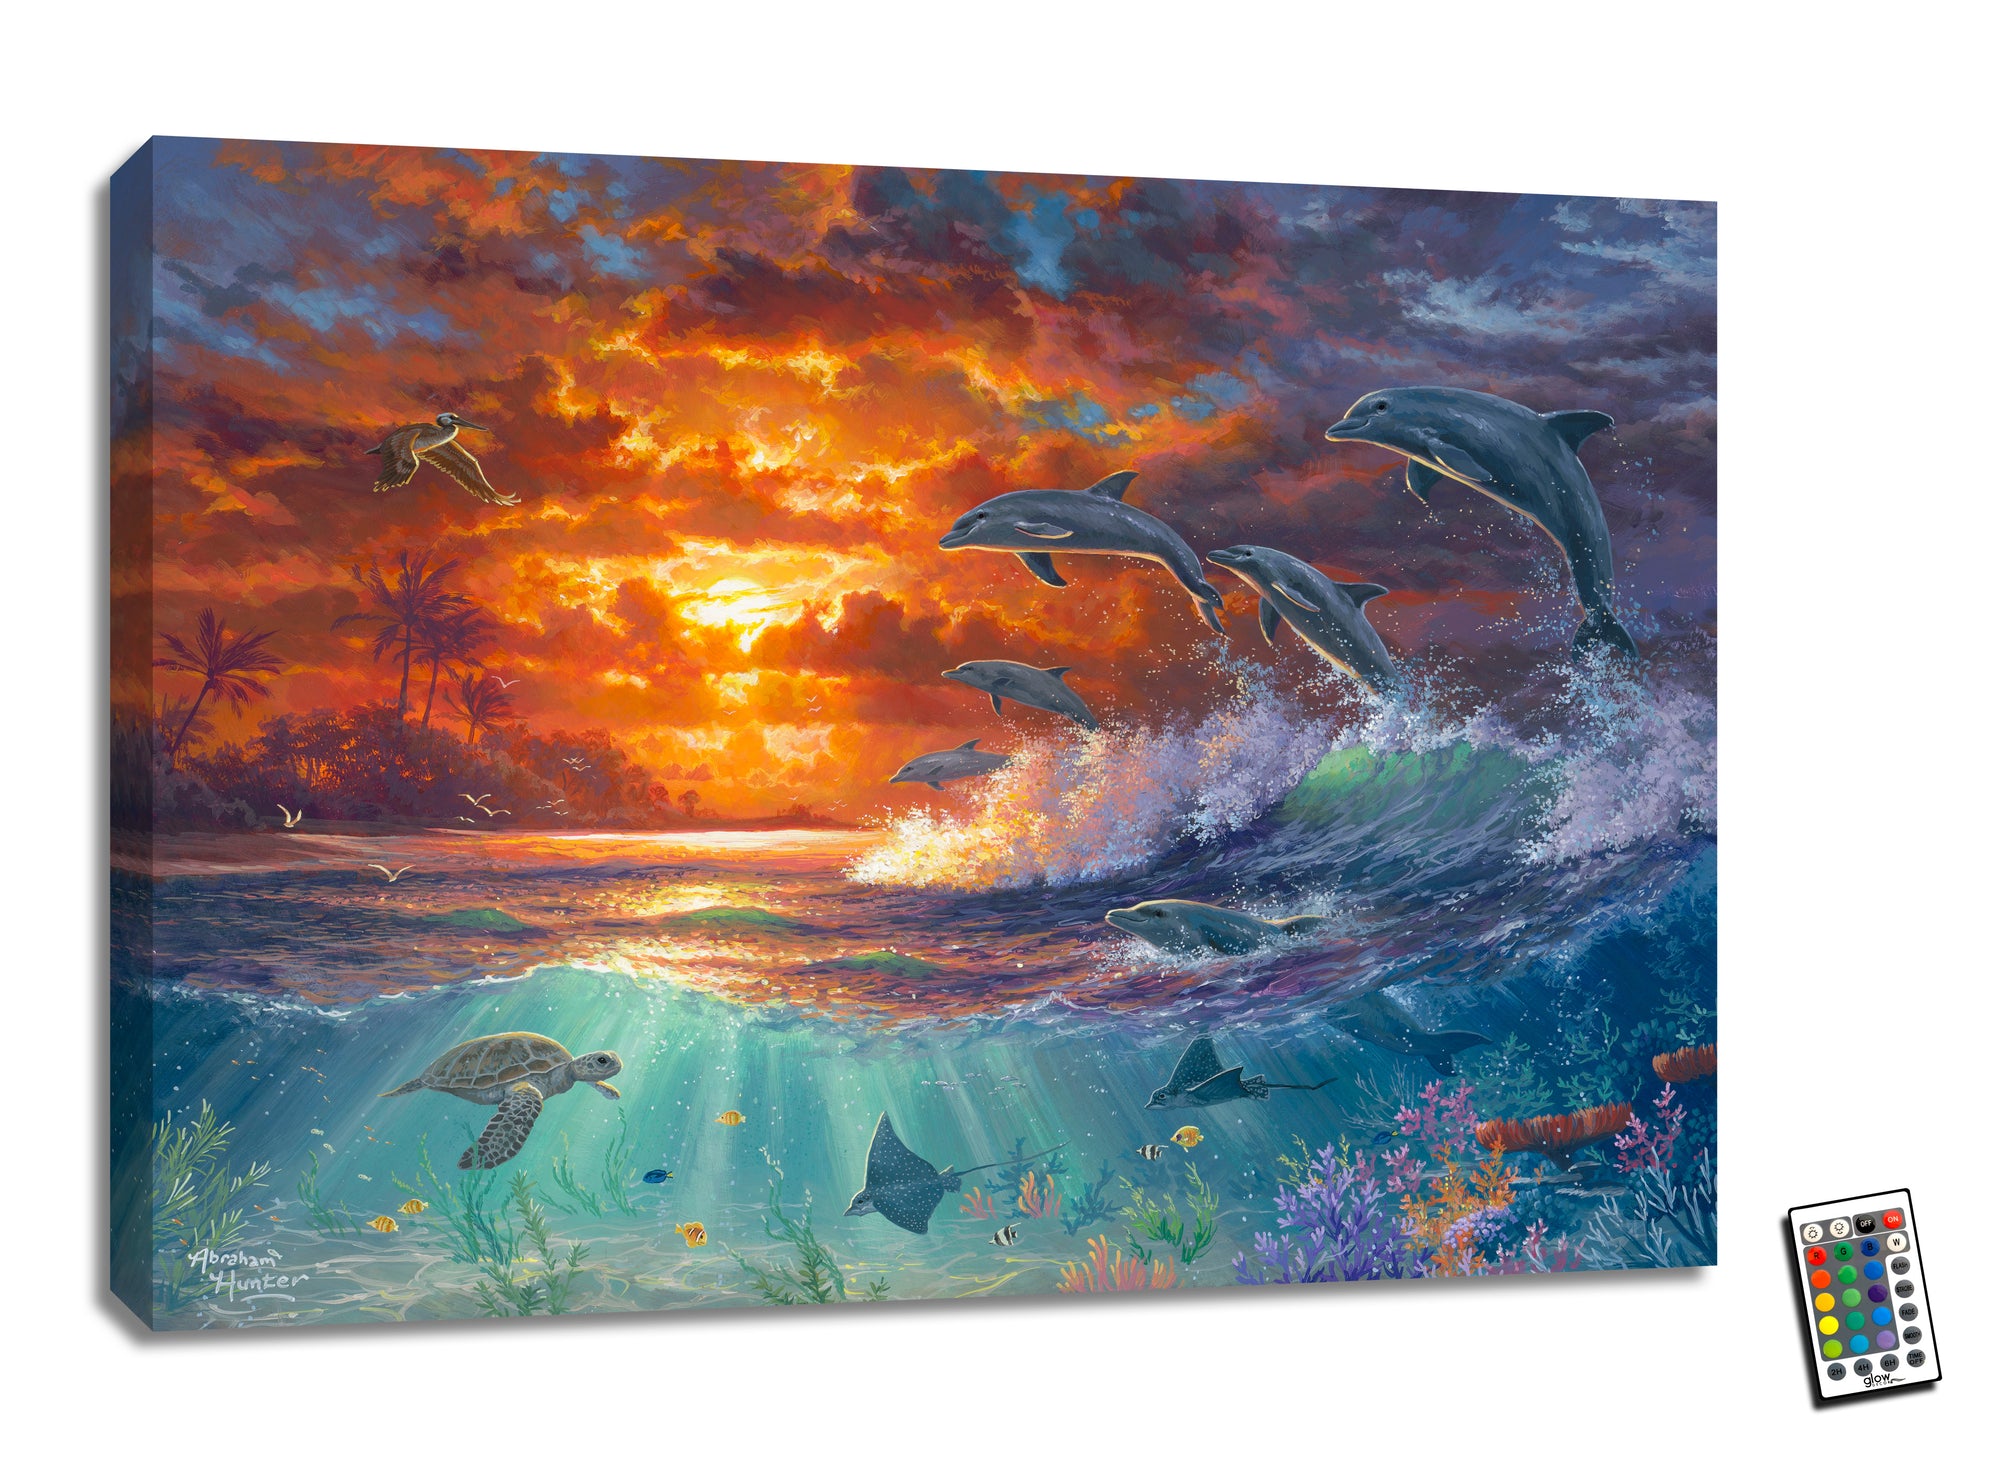 Beyond the Shore, a stunning 18x24 LED art piece that captures the romance and magic of the sea. Watch as dolphins leap out of the water, accompanied by turtles, stingrays, and an array of colorful fish, all set against the backdrop of a mesmerizing sunset.